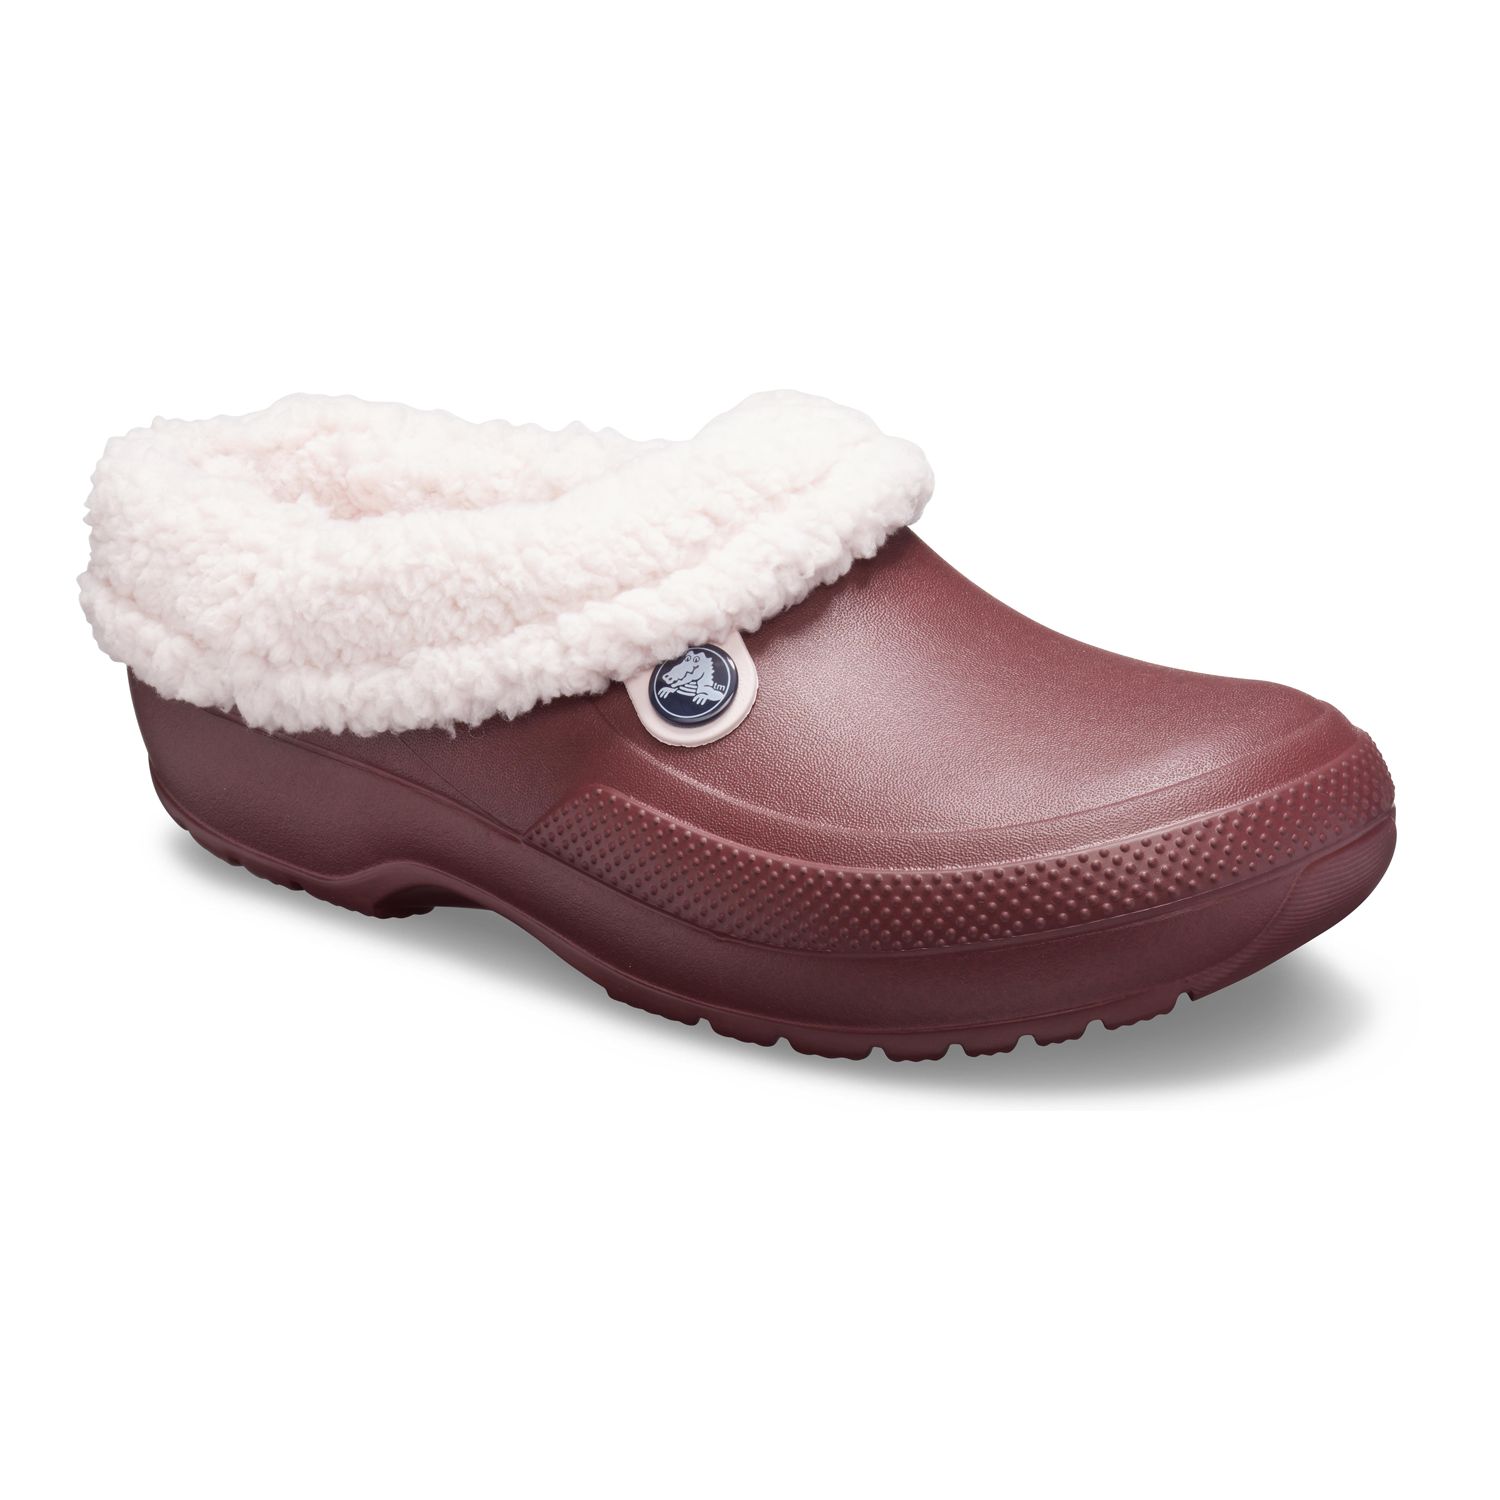 crocs with liner removable